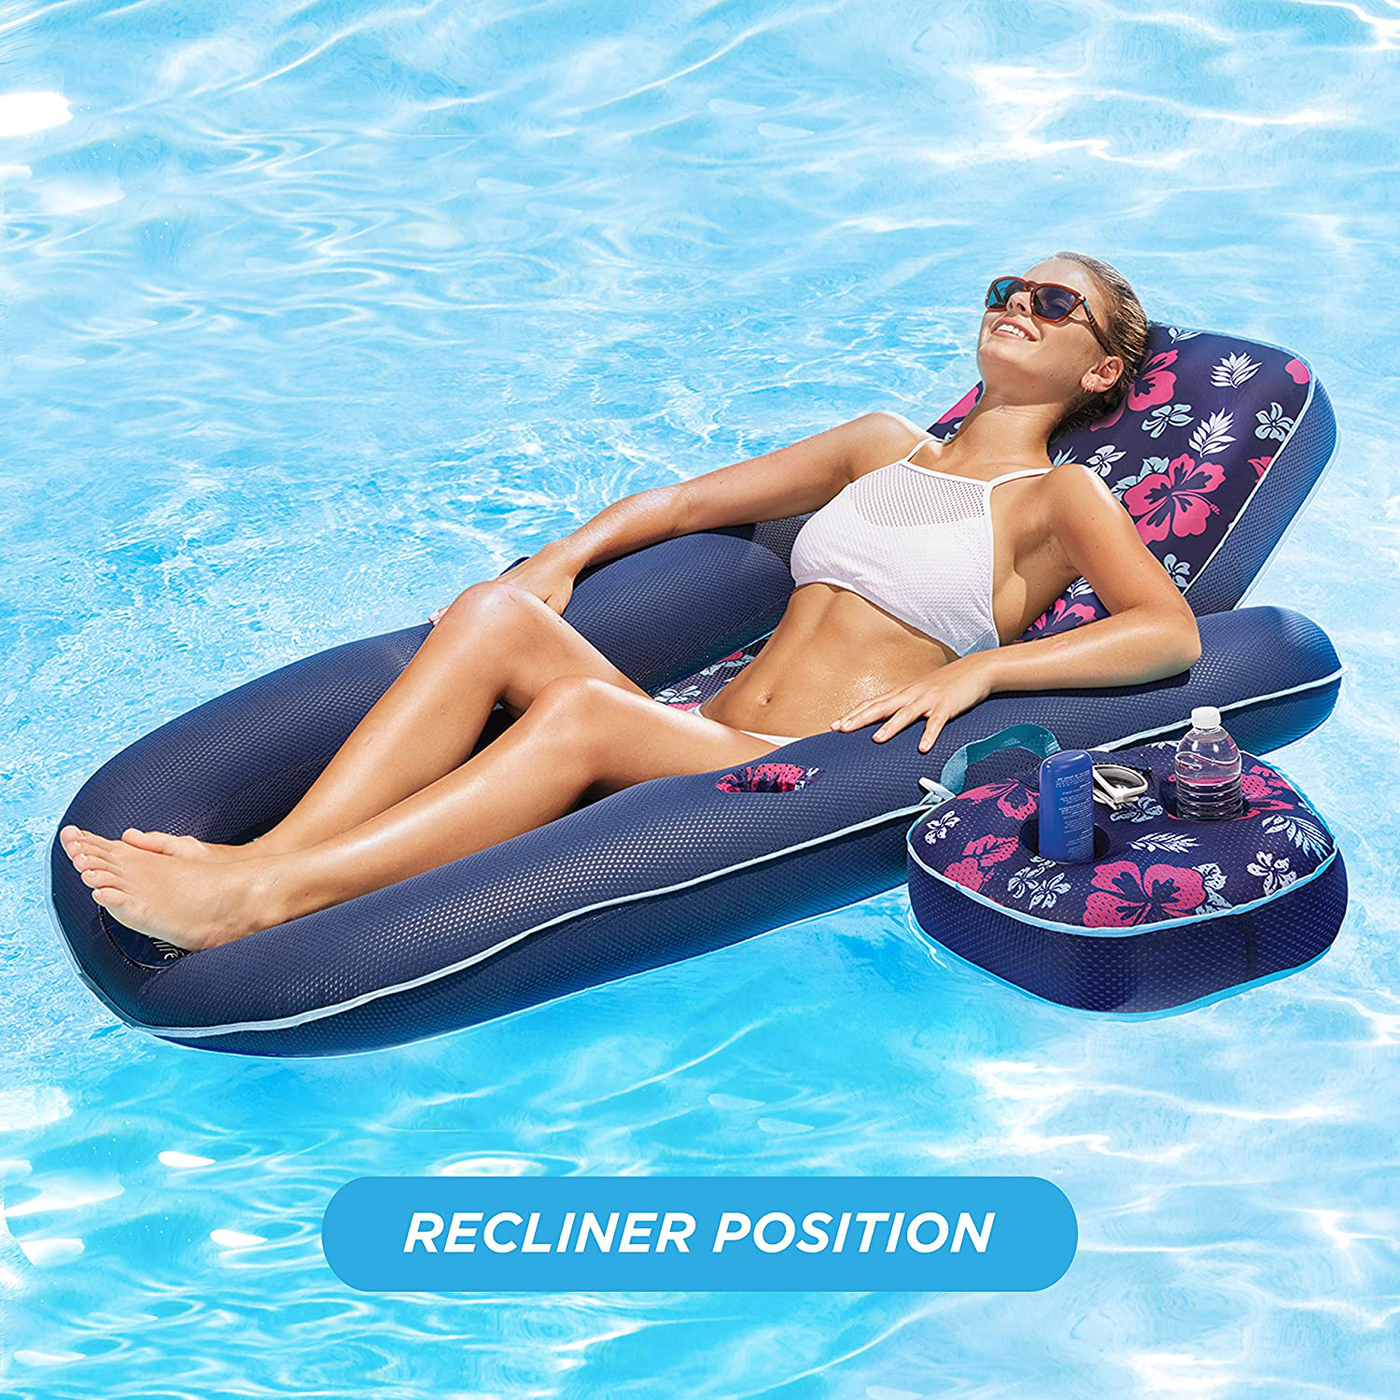 Aqua Campania Ultimate 2 in 1 Recliner & Tanner Pool Lounger with Adjustable Backrest and Caddy, Inflatable Pool Float